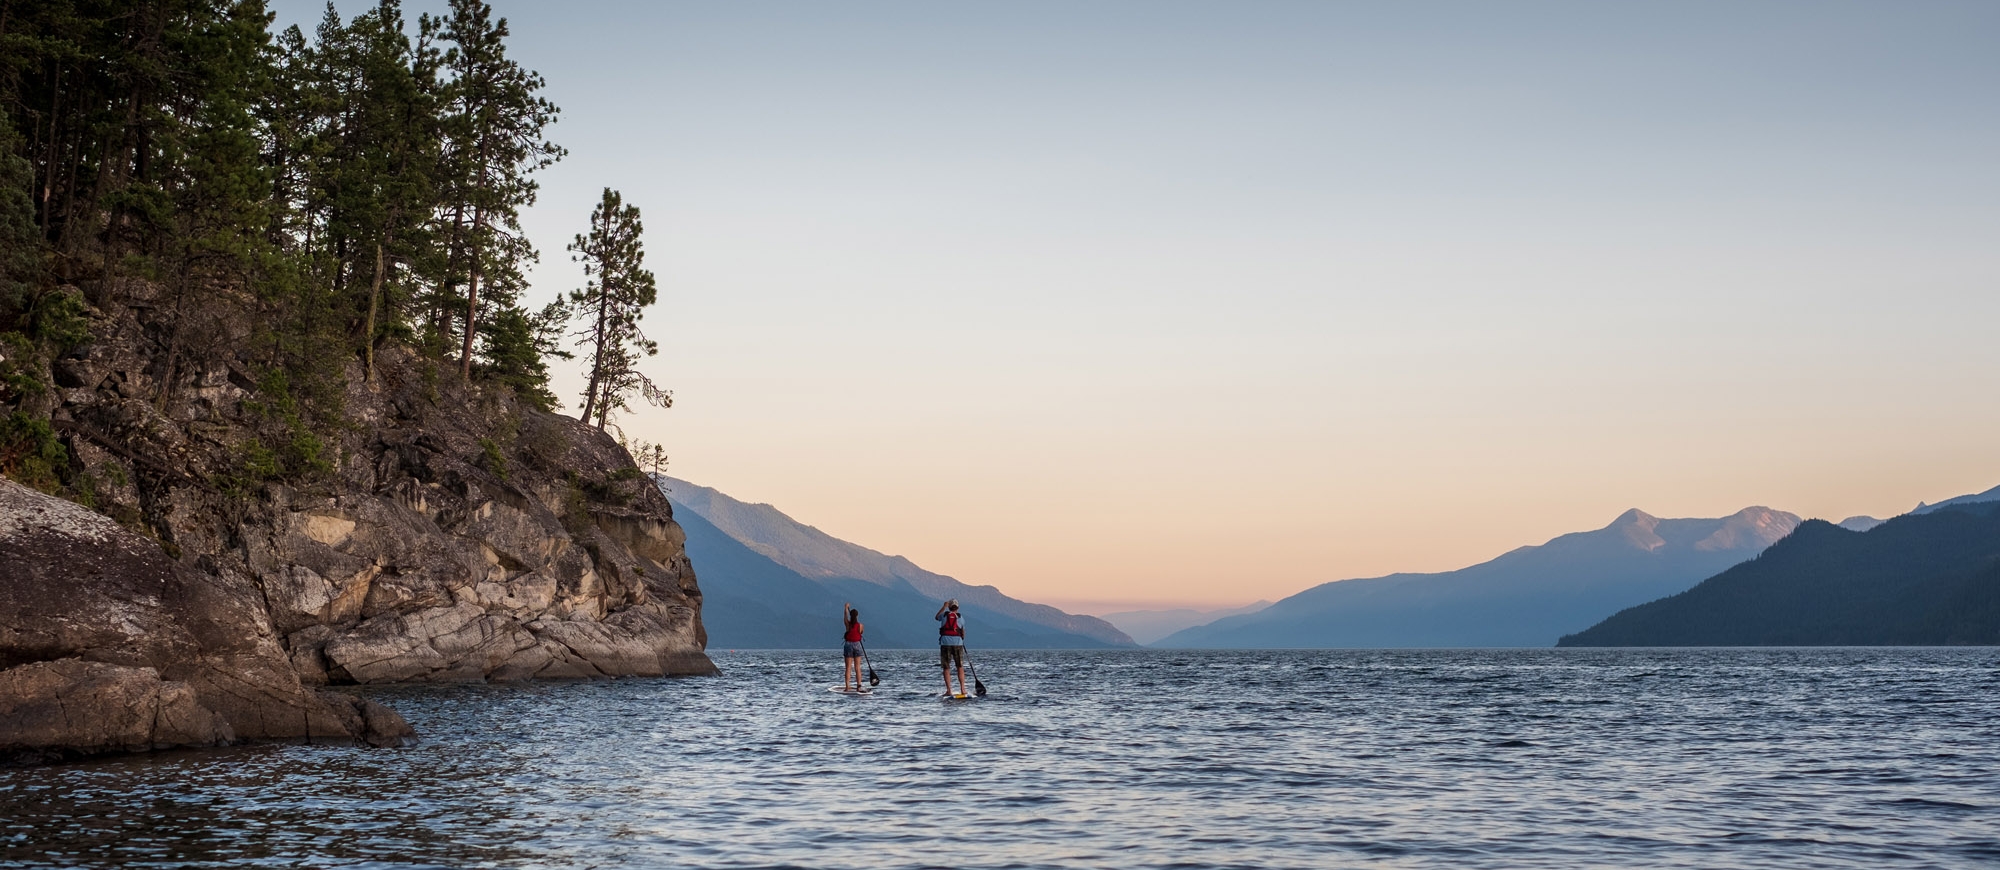 Two stand up paddle boarders on the East Shore of Kootenay Lake, BC.